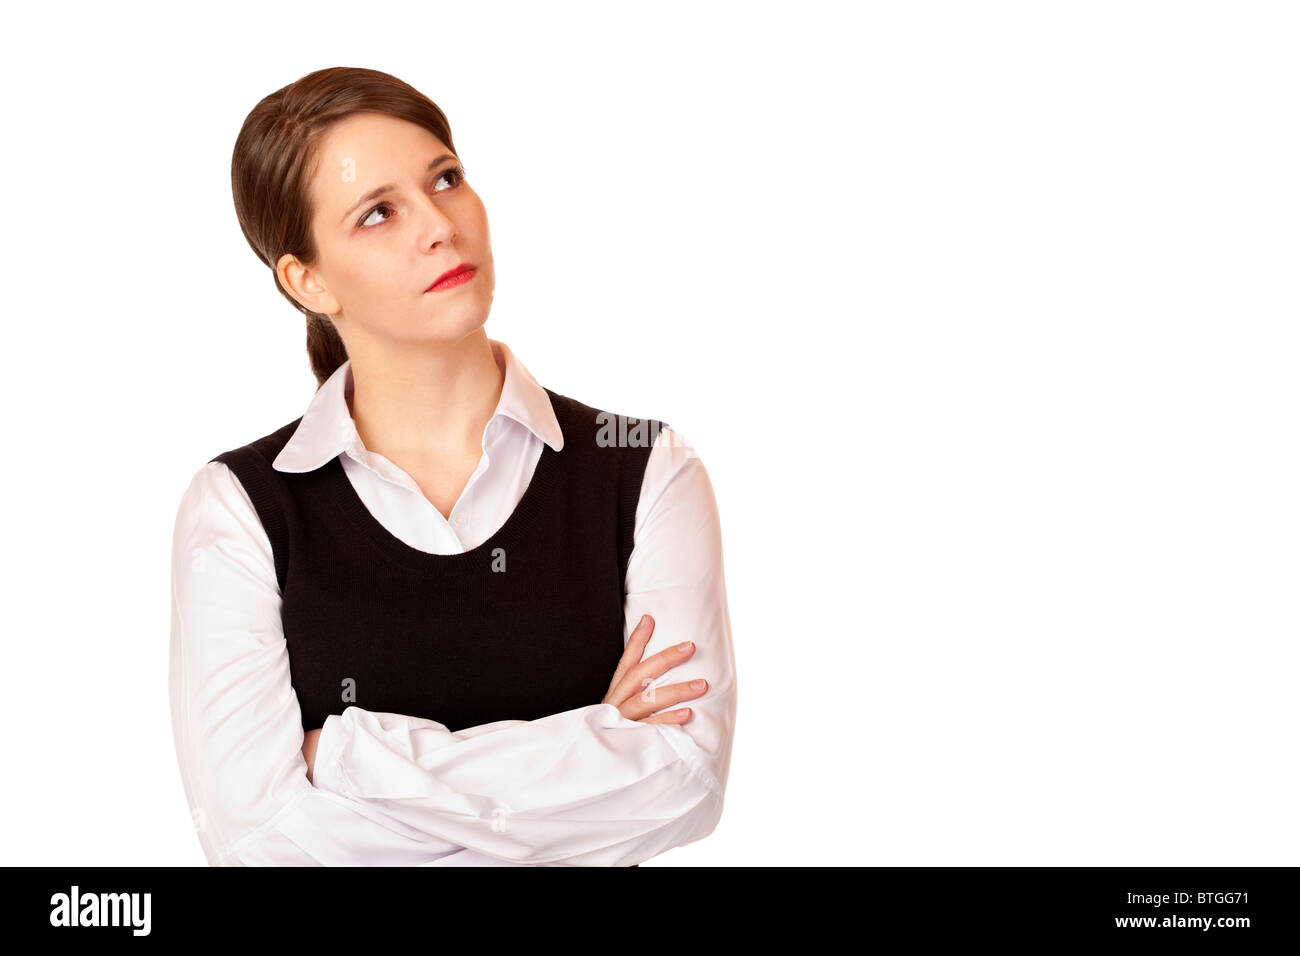 Young businesswoman with crossed arms looks up into the corner. Isolated on white background. Stock Photo